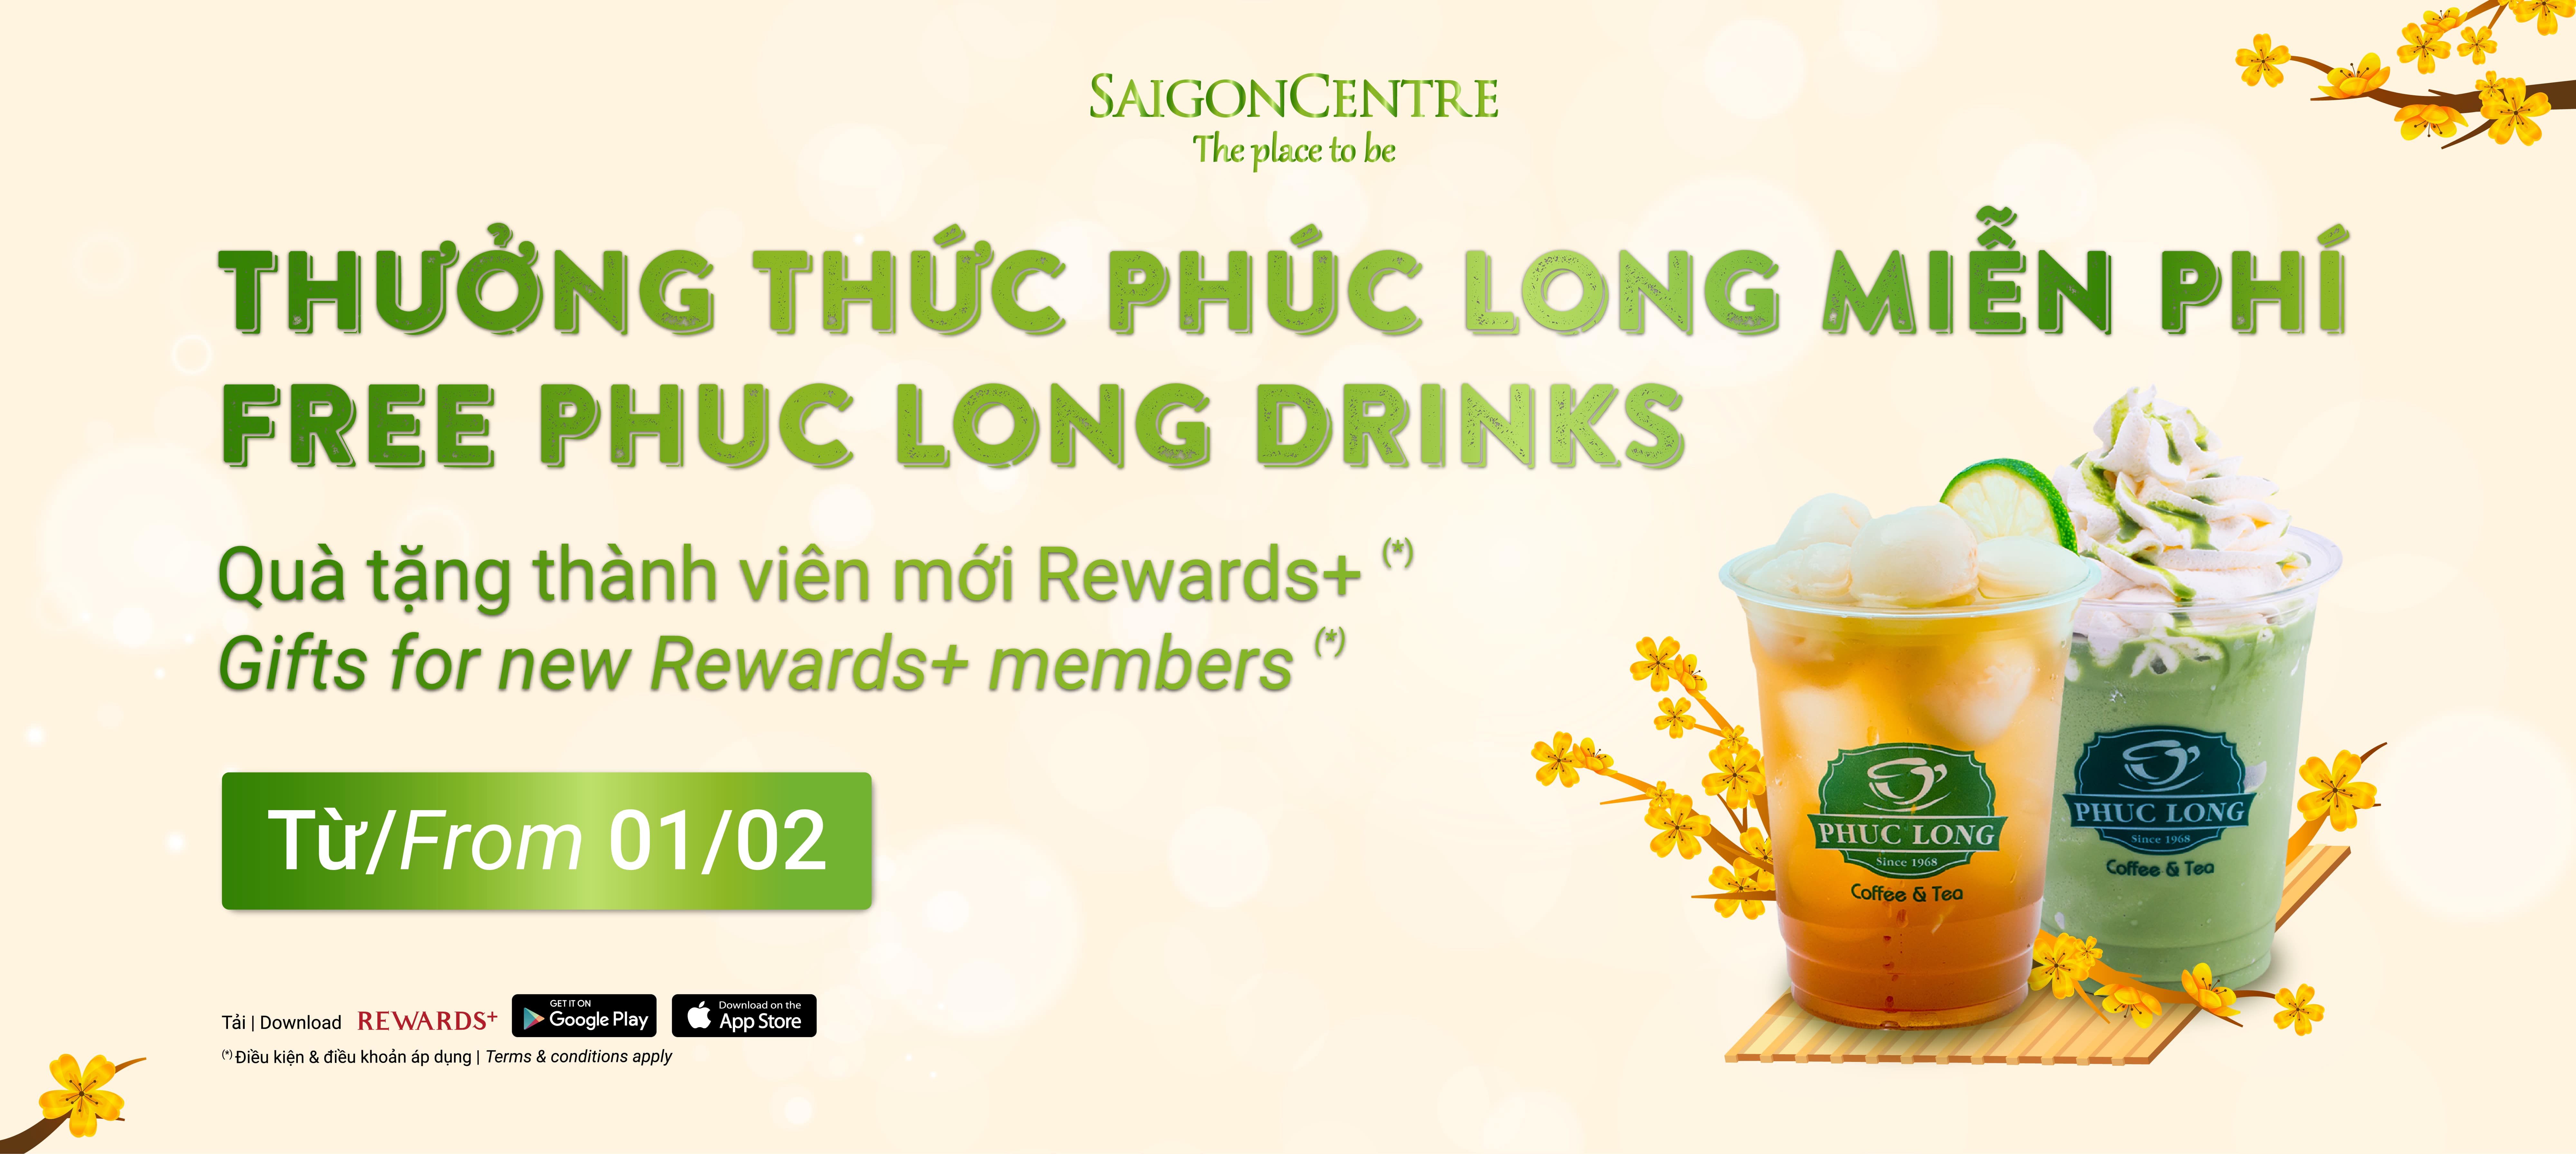 FREE PHUC LONG DRINKS FOR NEW REWARDS+ MEMBERS